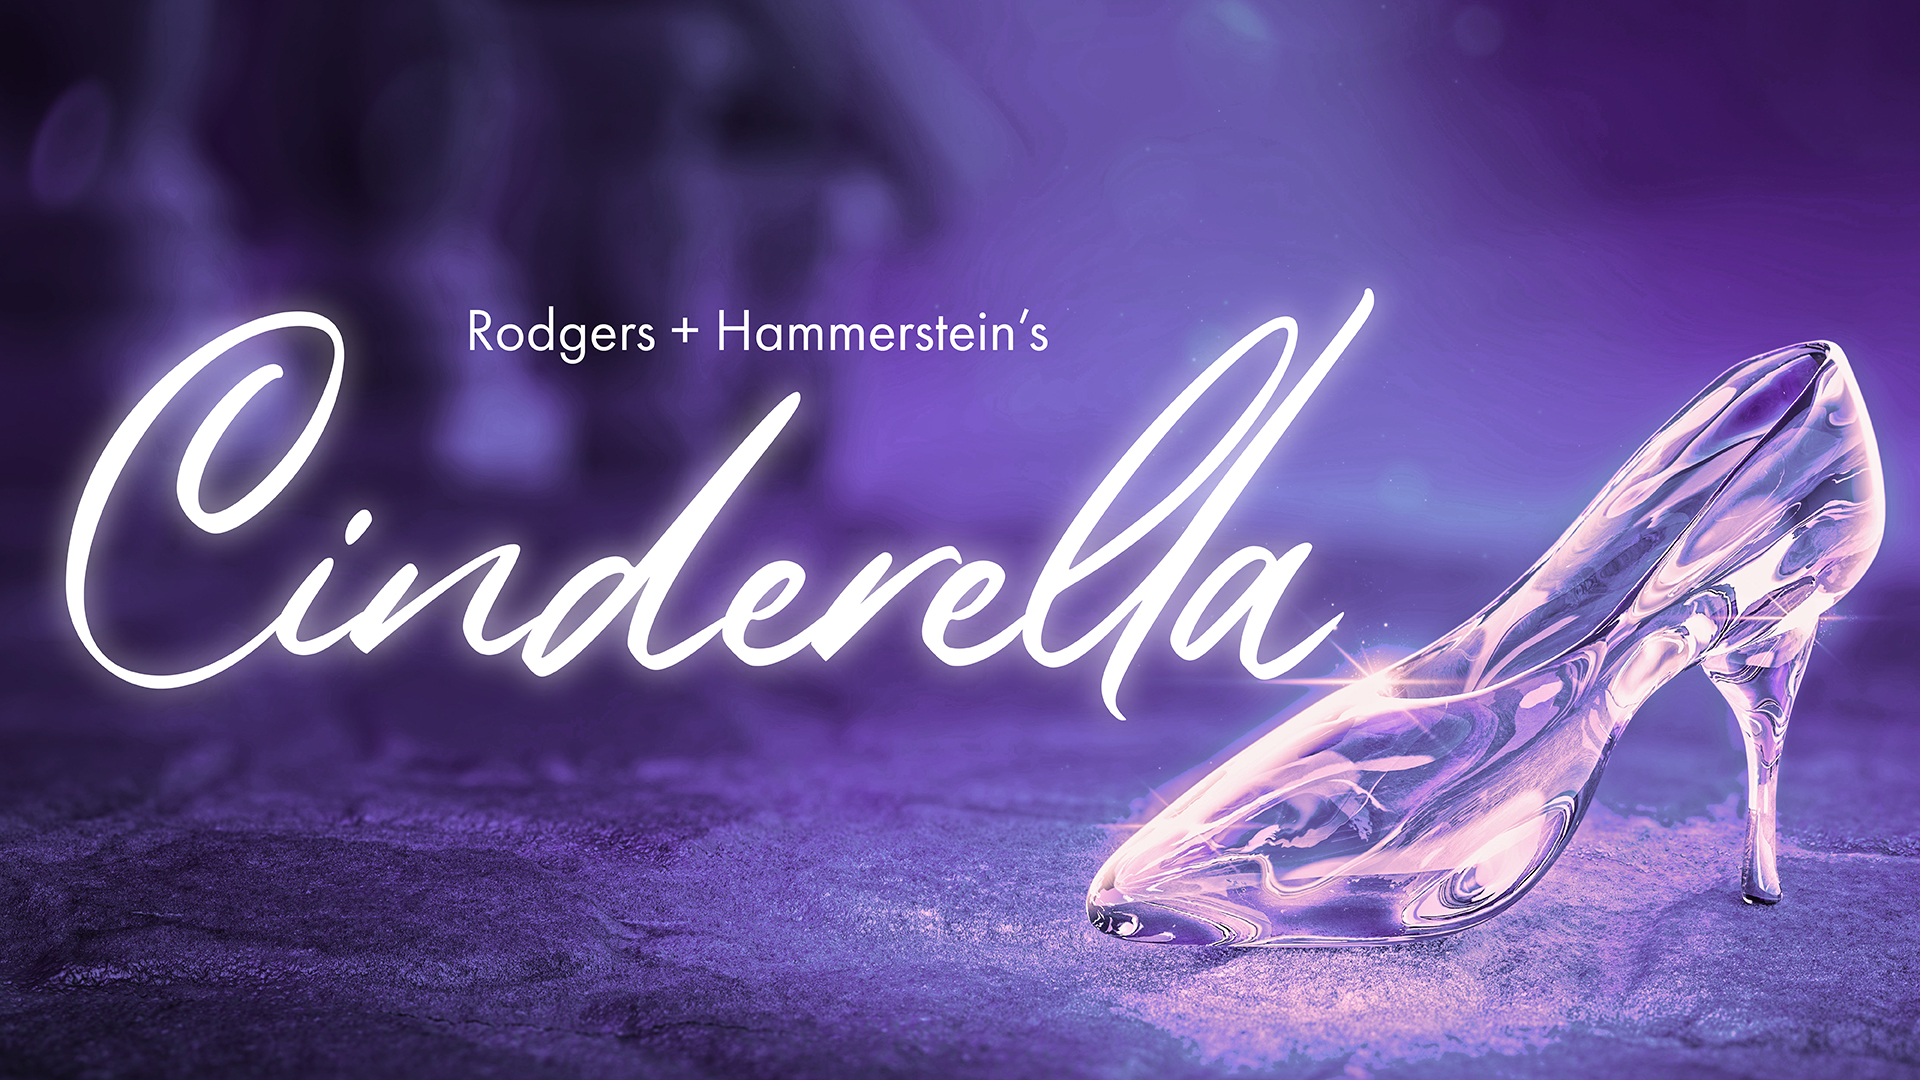 Cinderella logo of cursive text over an image of a glass slipper on a violet background